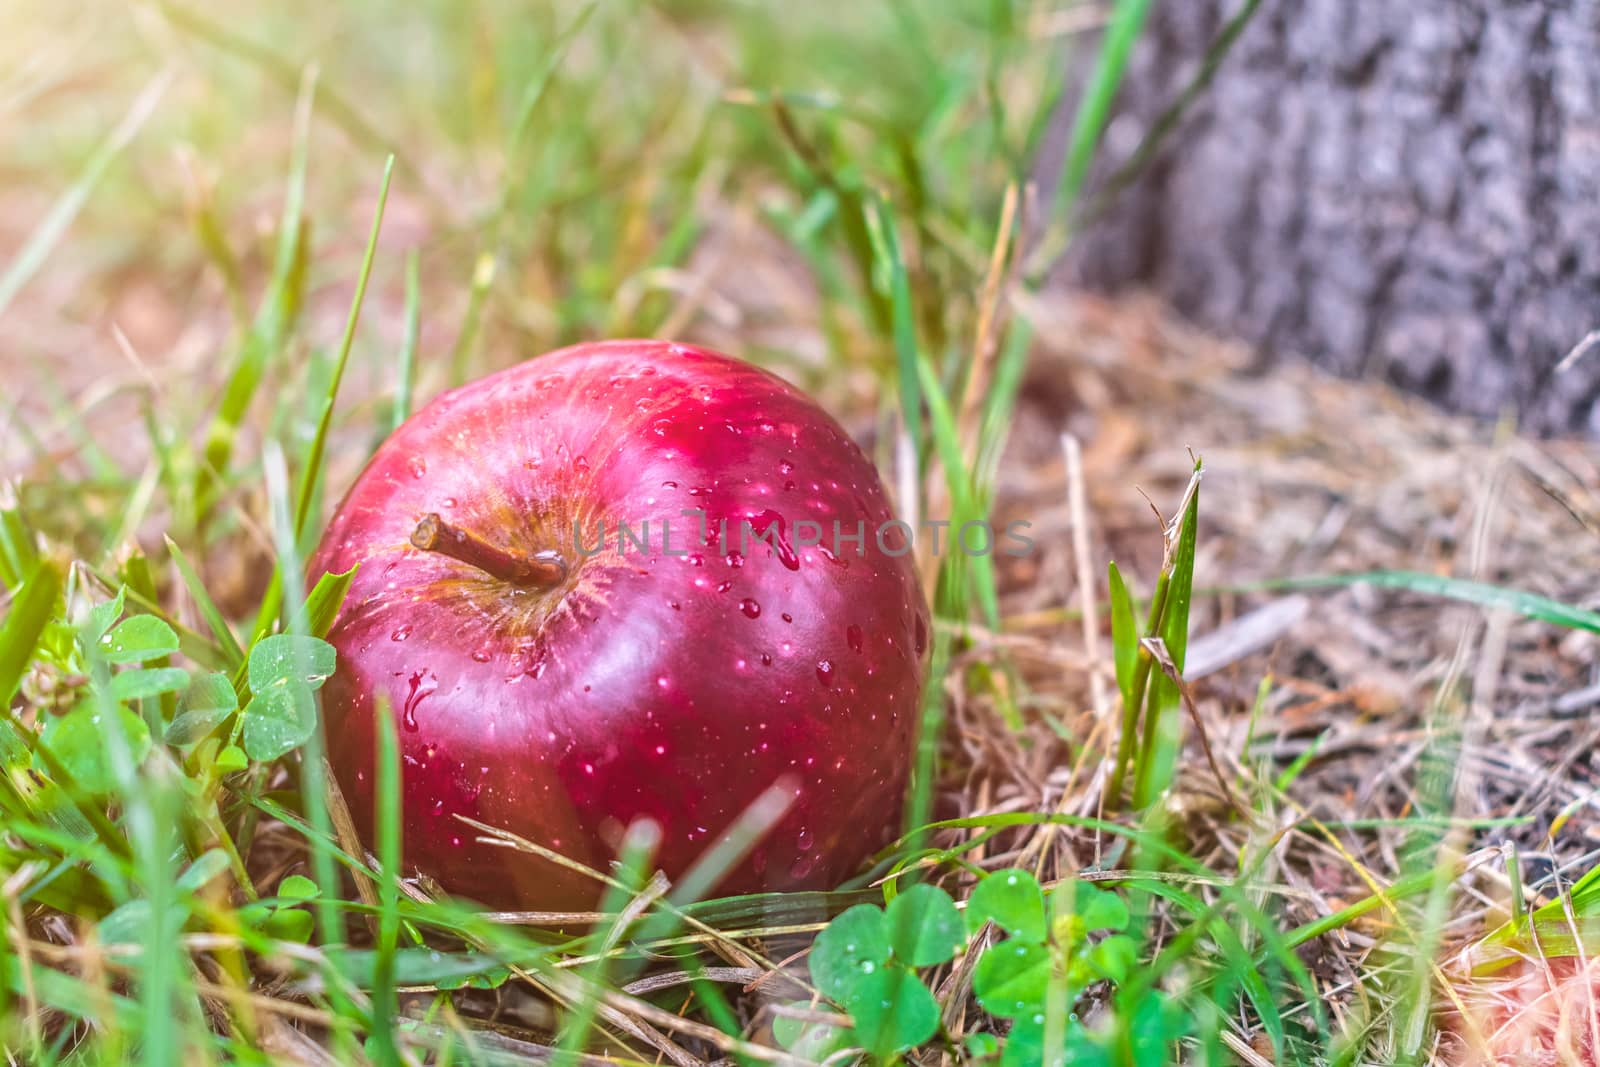 A large red and ripe apple fell from the tree to the ground